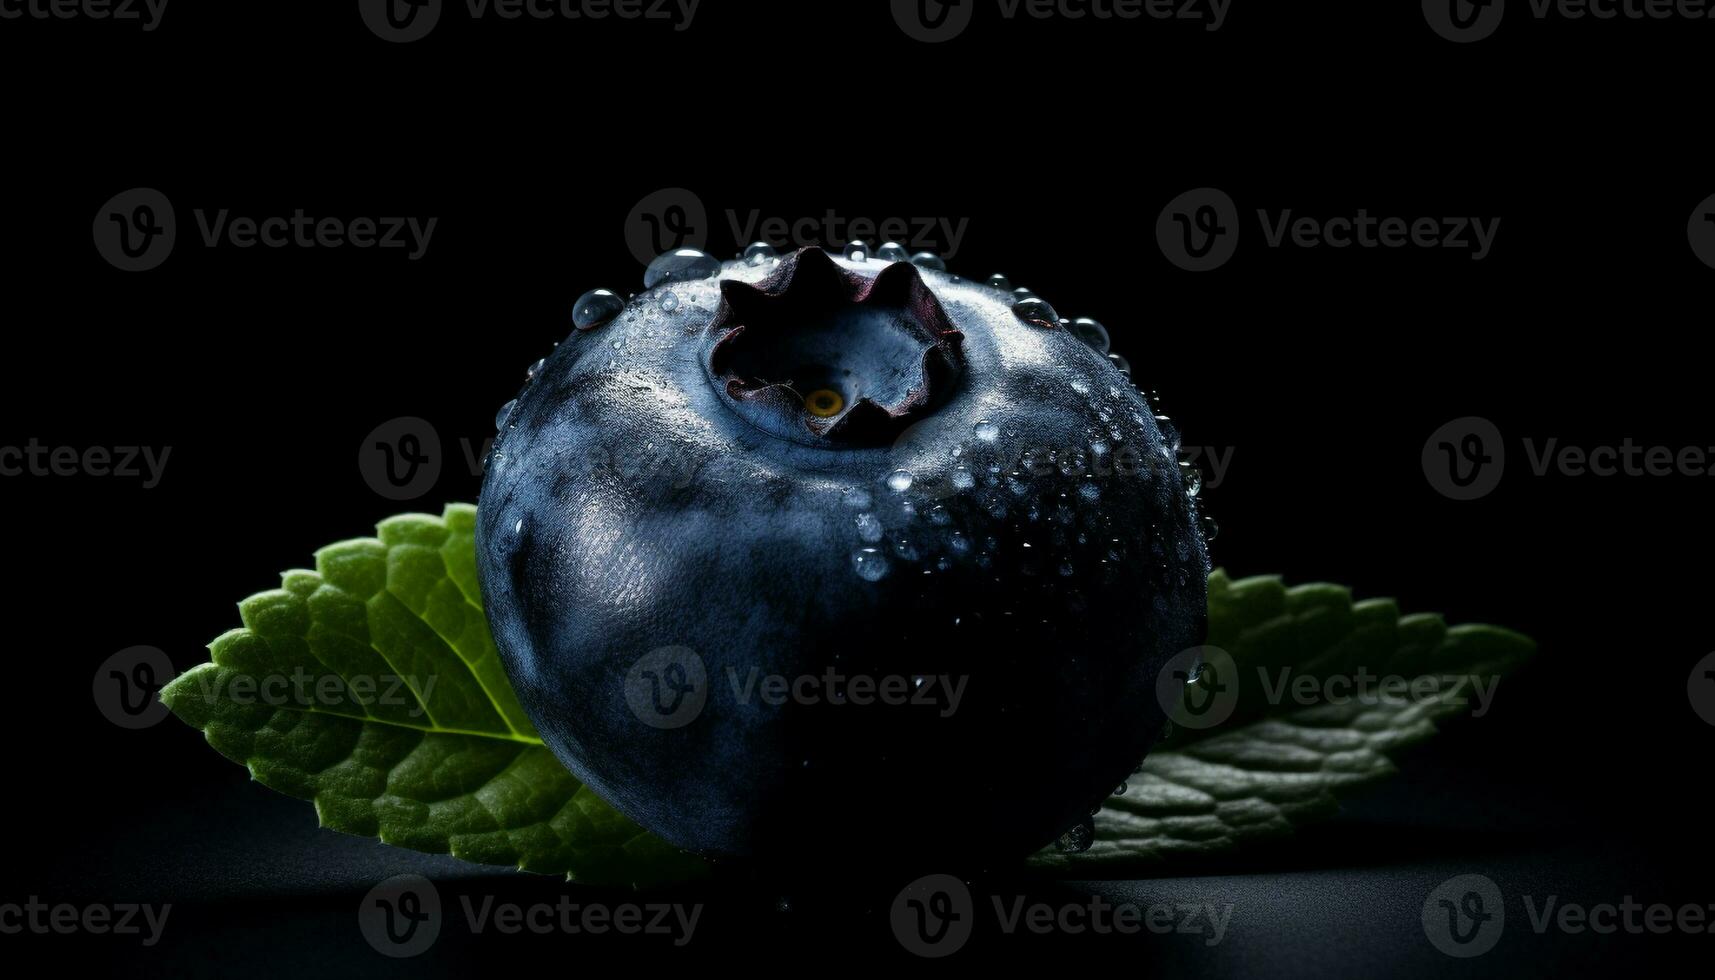 Freshness and nature reflected in ripe, wet, organic berry fruit generated by AI photo